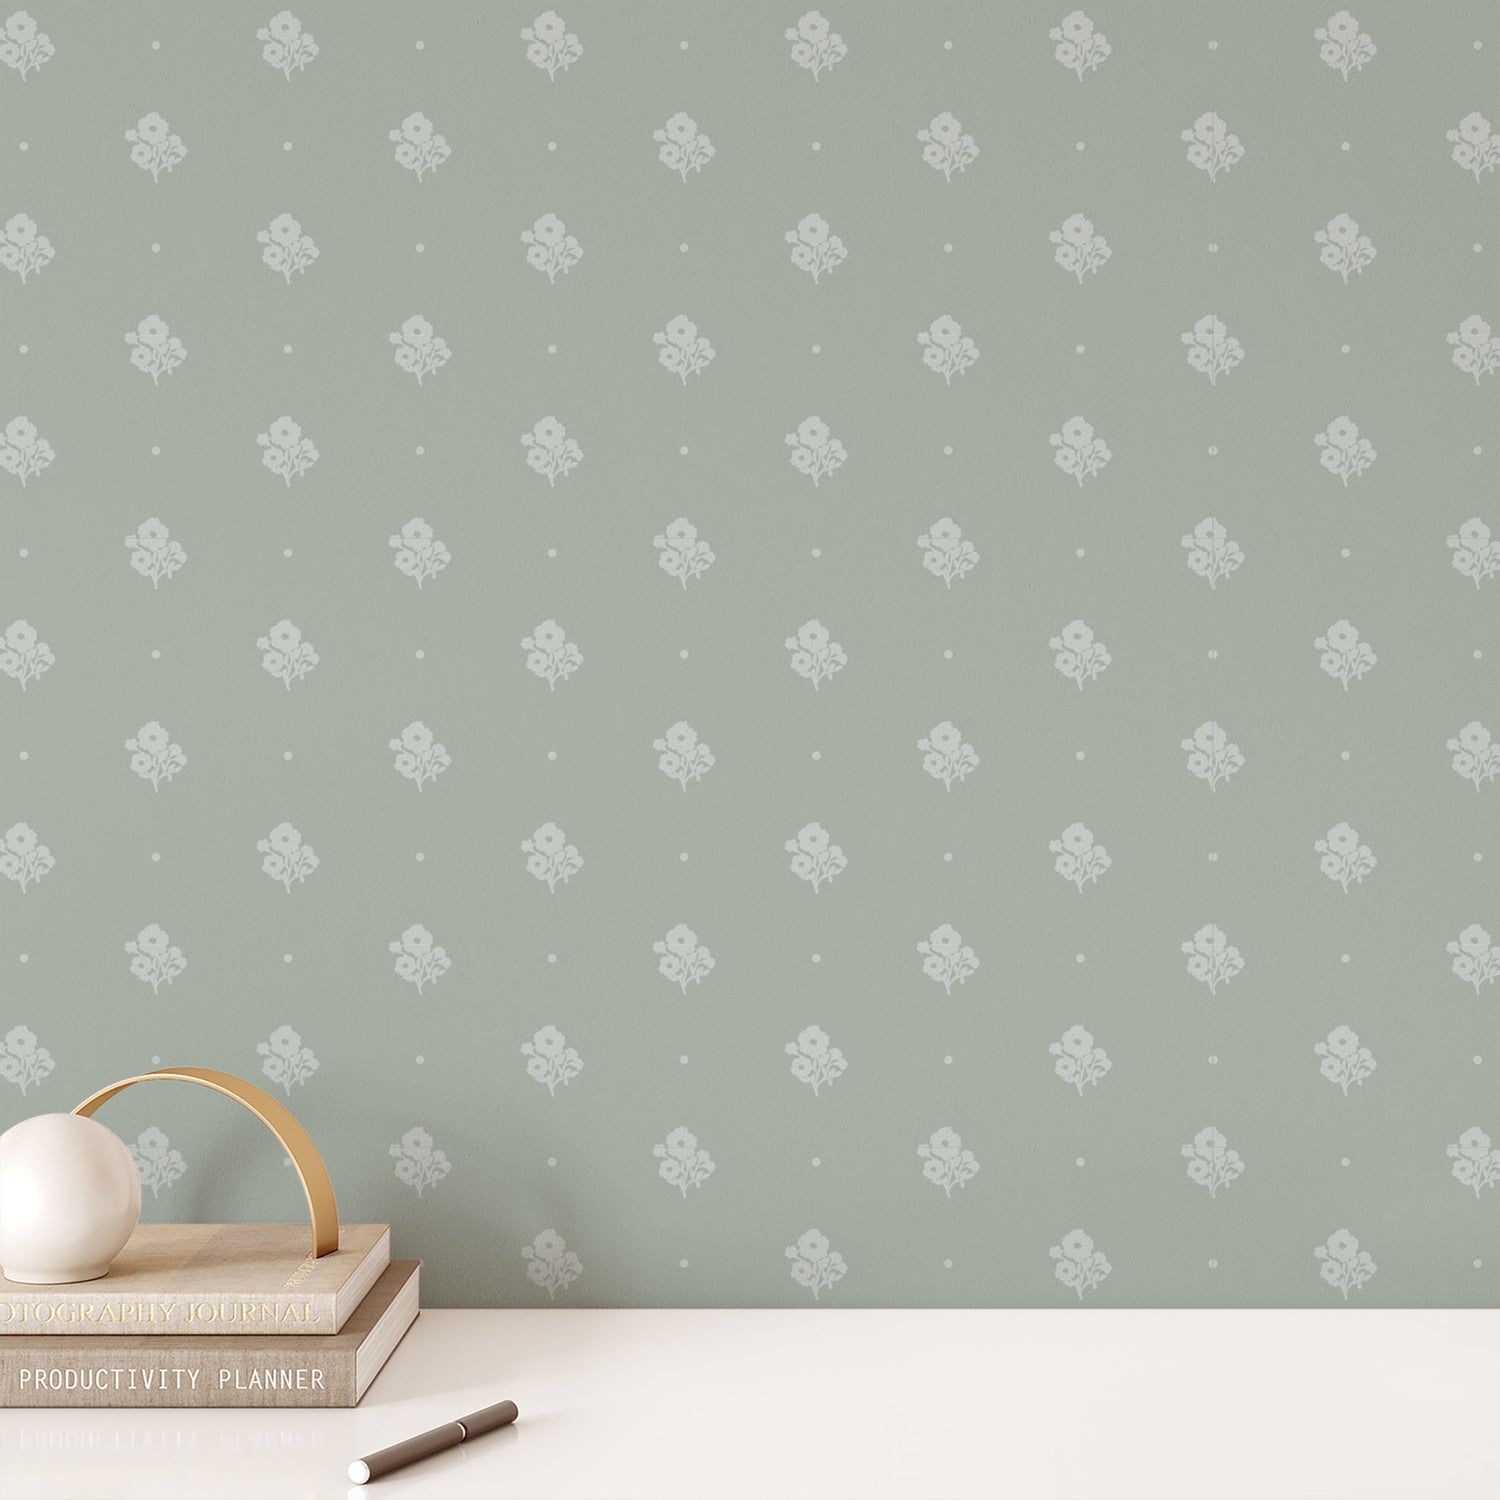 Elevate your home decor with our Cambridge Wallpaper in a sophisticated green hue shown in a full size image.